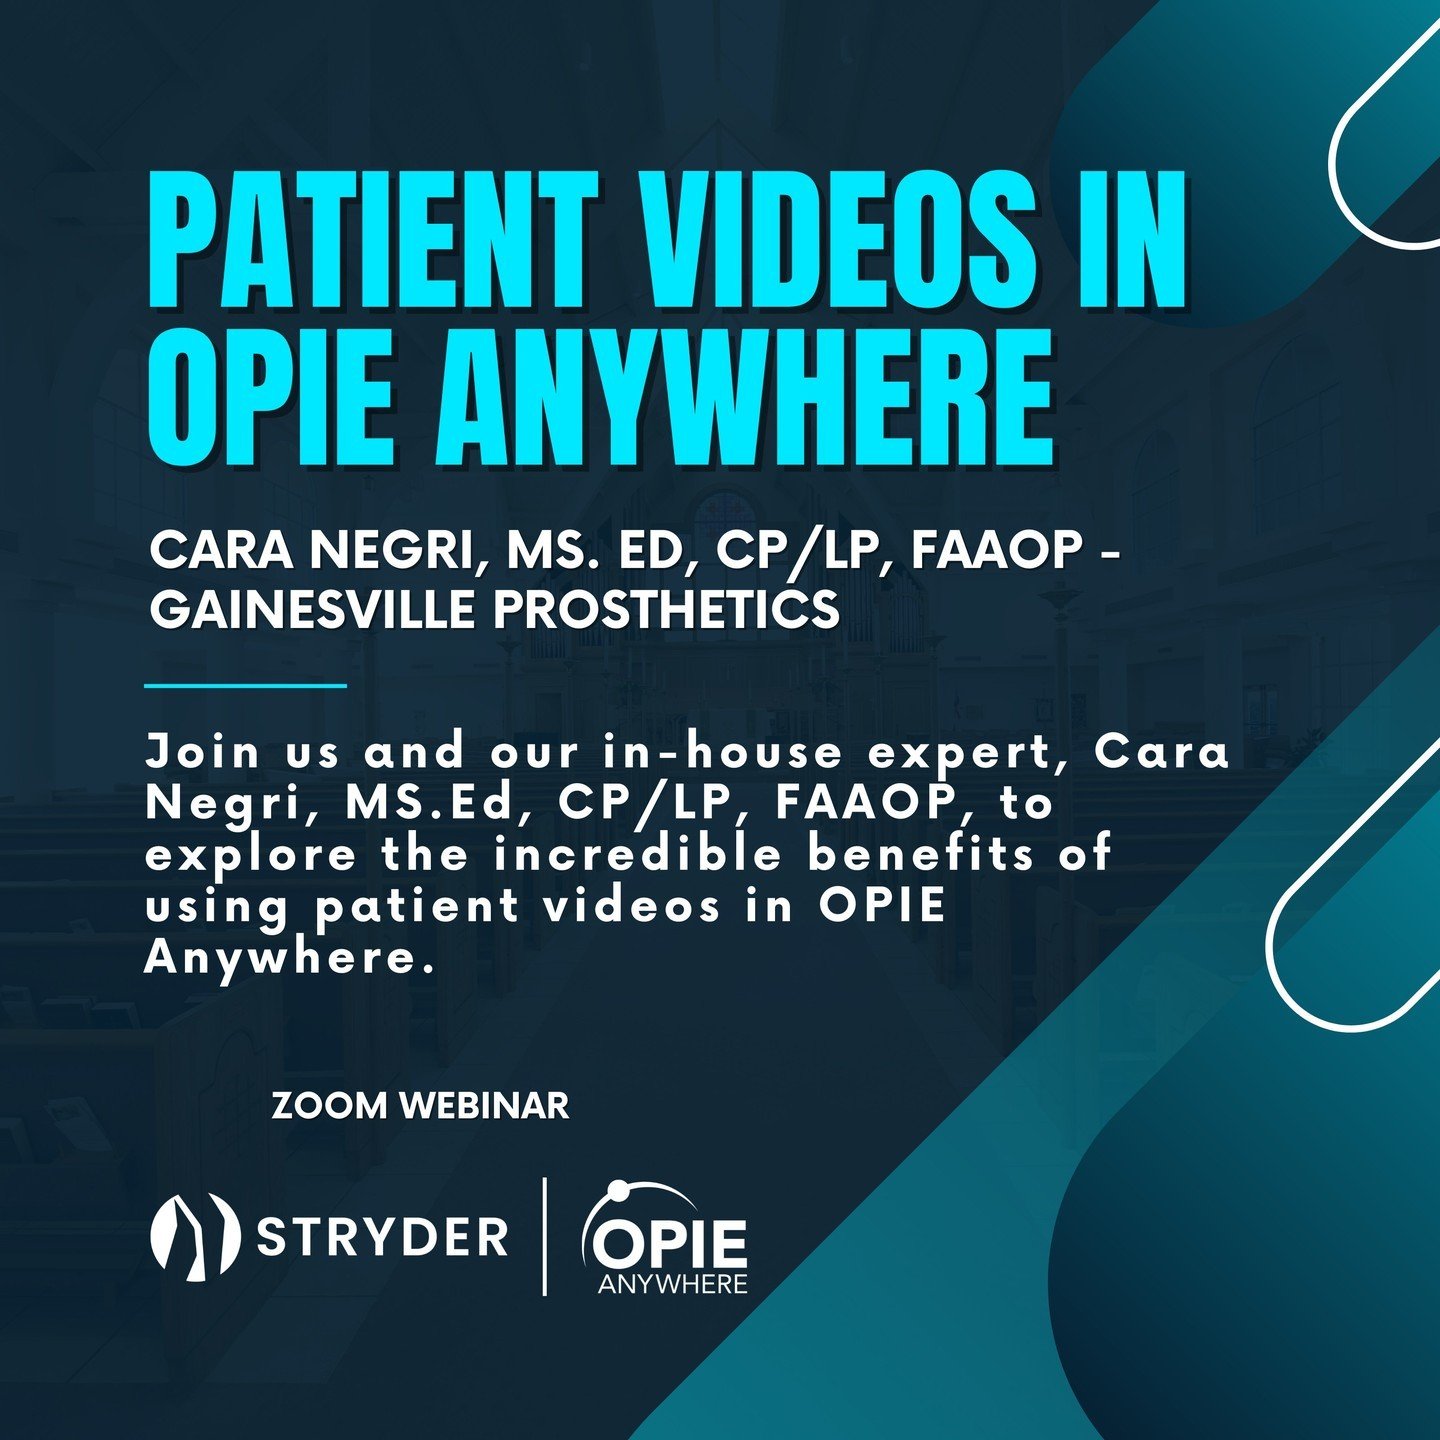 🎥 Unlock the Power of Patient Videos in OPIE Anywhere! 🌟

Join us and our in-house expert, Cara Negri, MS.Ed, CP/LP, FAAOP, tomorrow, May 23, to explore the incredible benefits of using patient videos in OPIE Anywhere.

- Say goodbye to toggling be